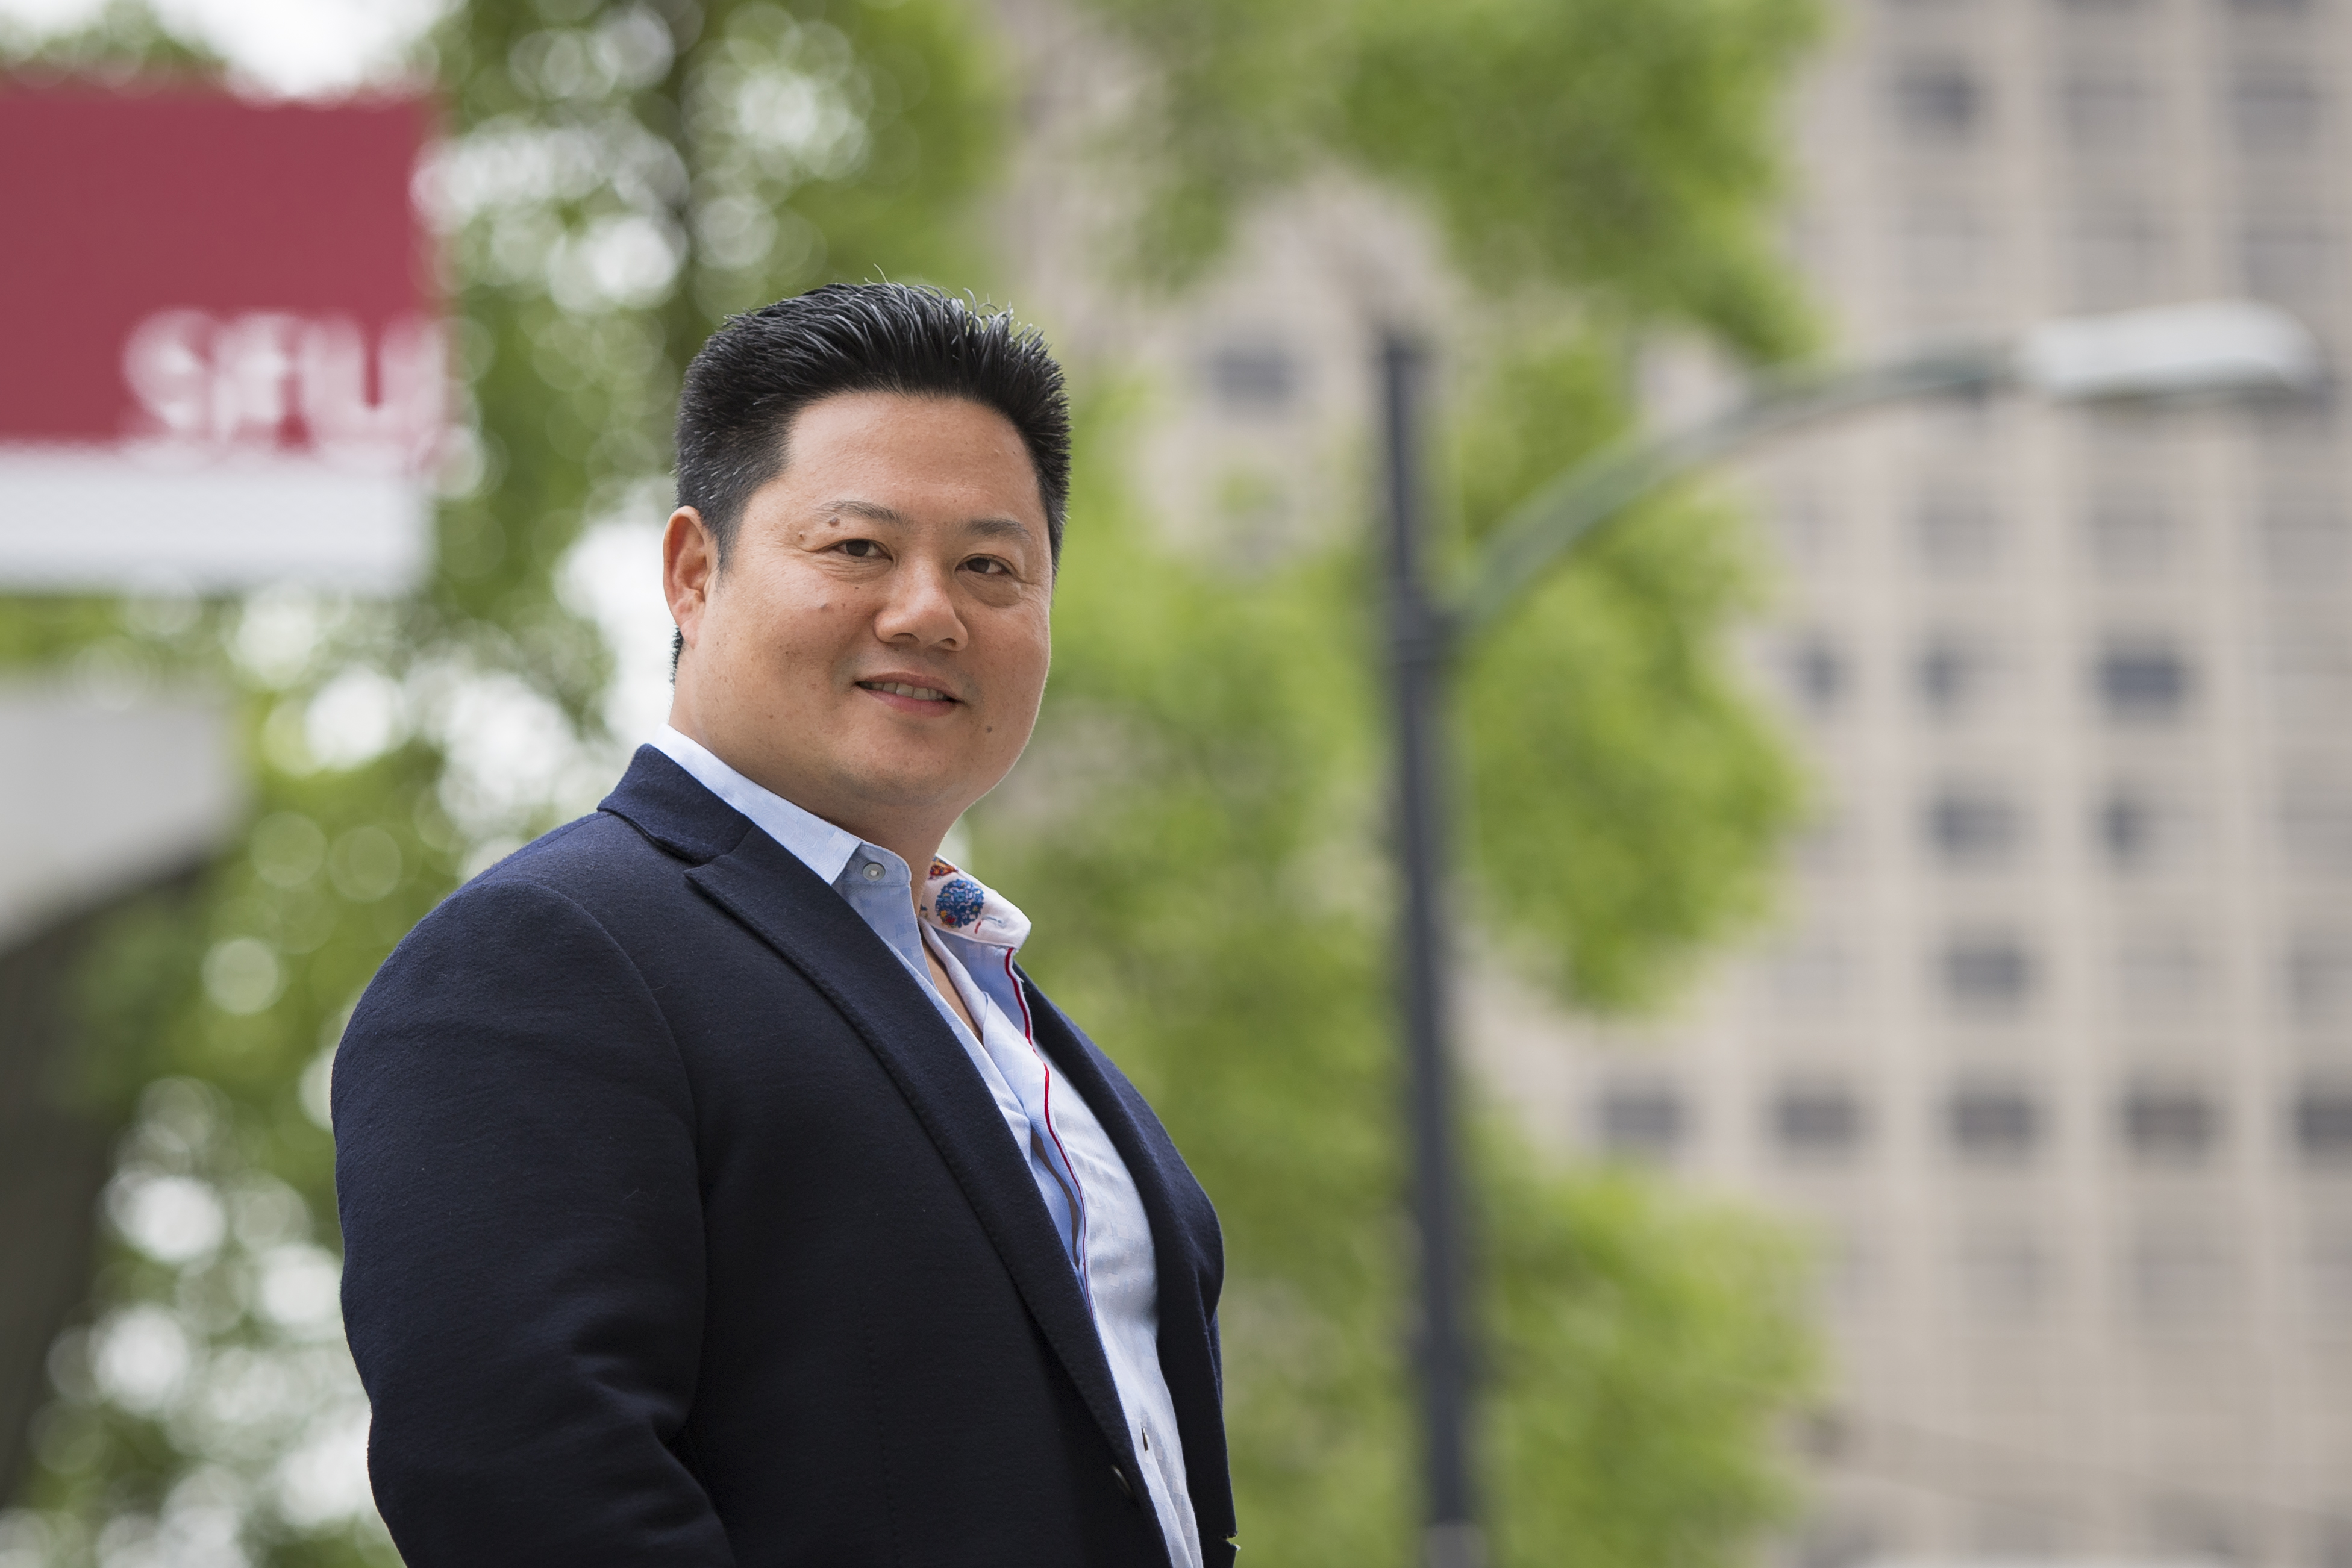 Beedie School of Business alumnus Charles Chang, founder of plant-based nutrition company Vega. 